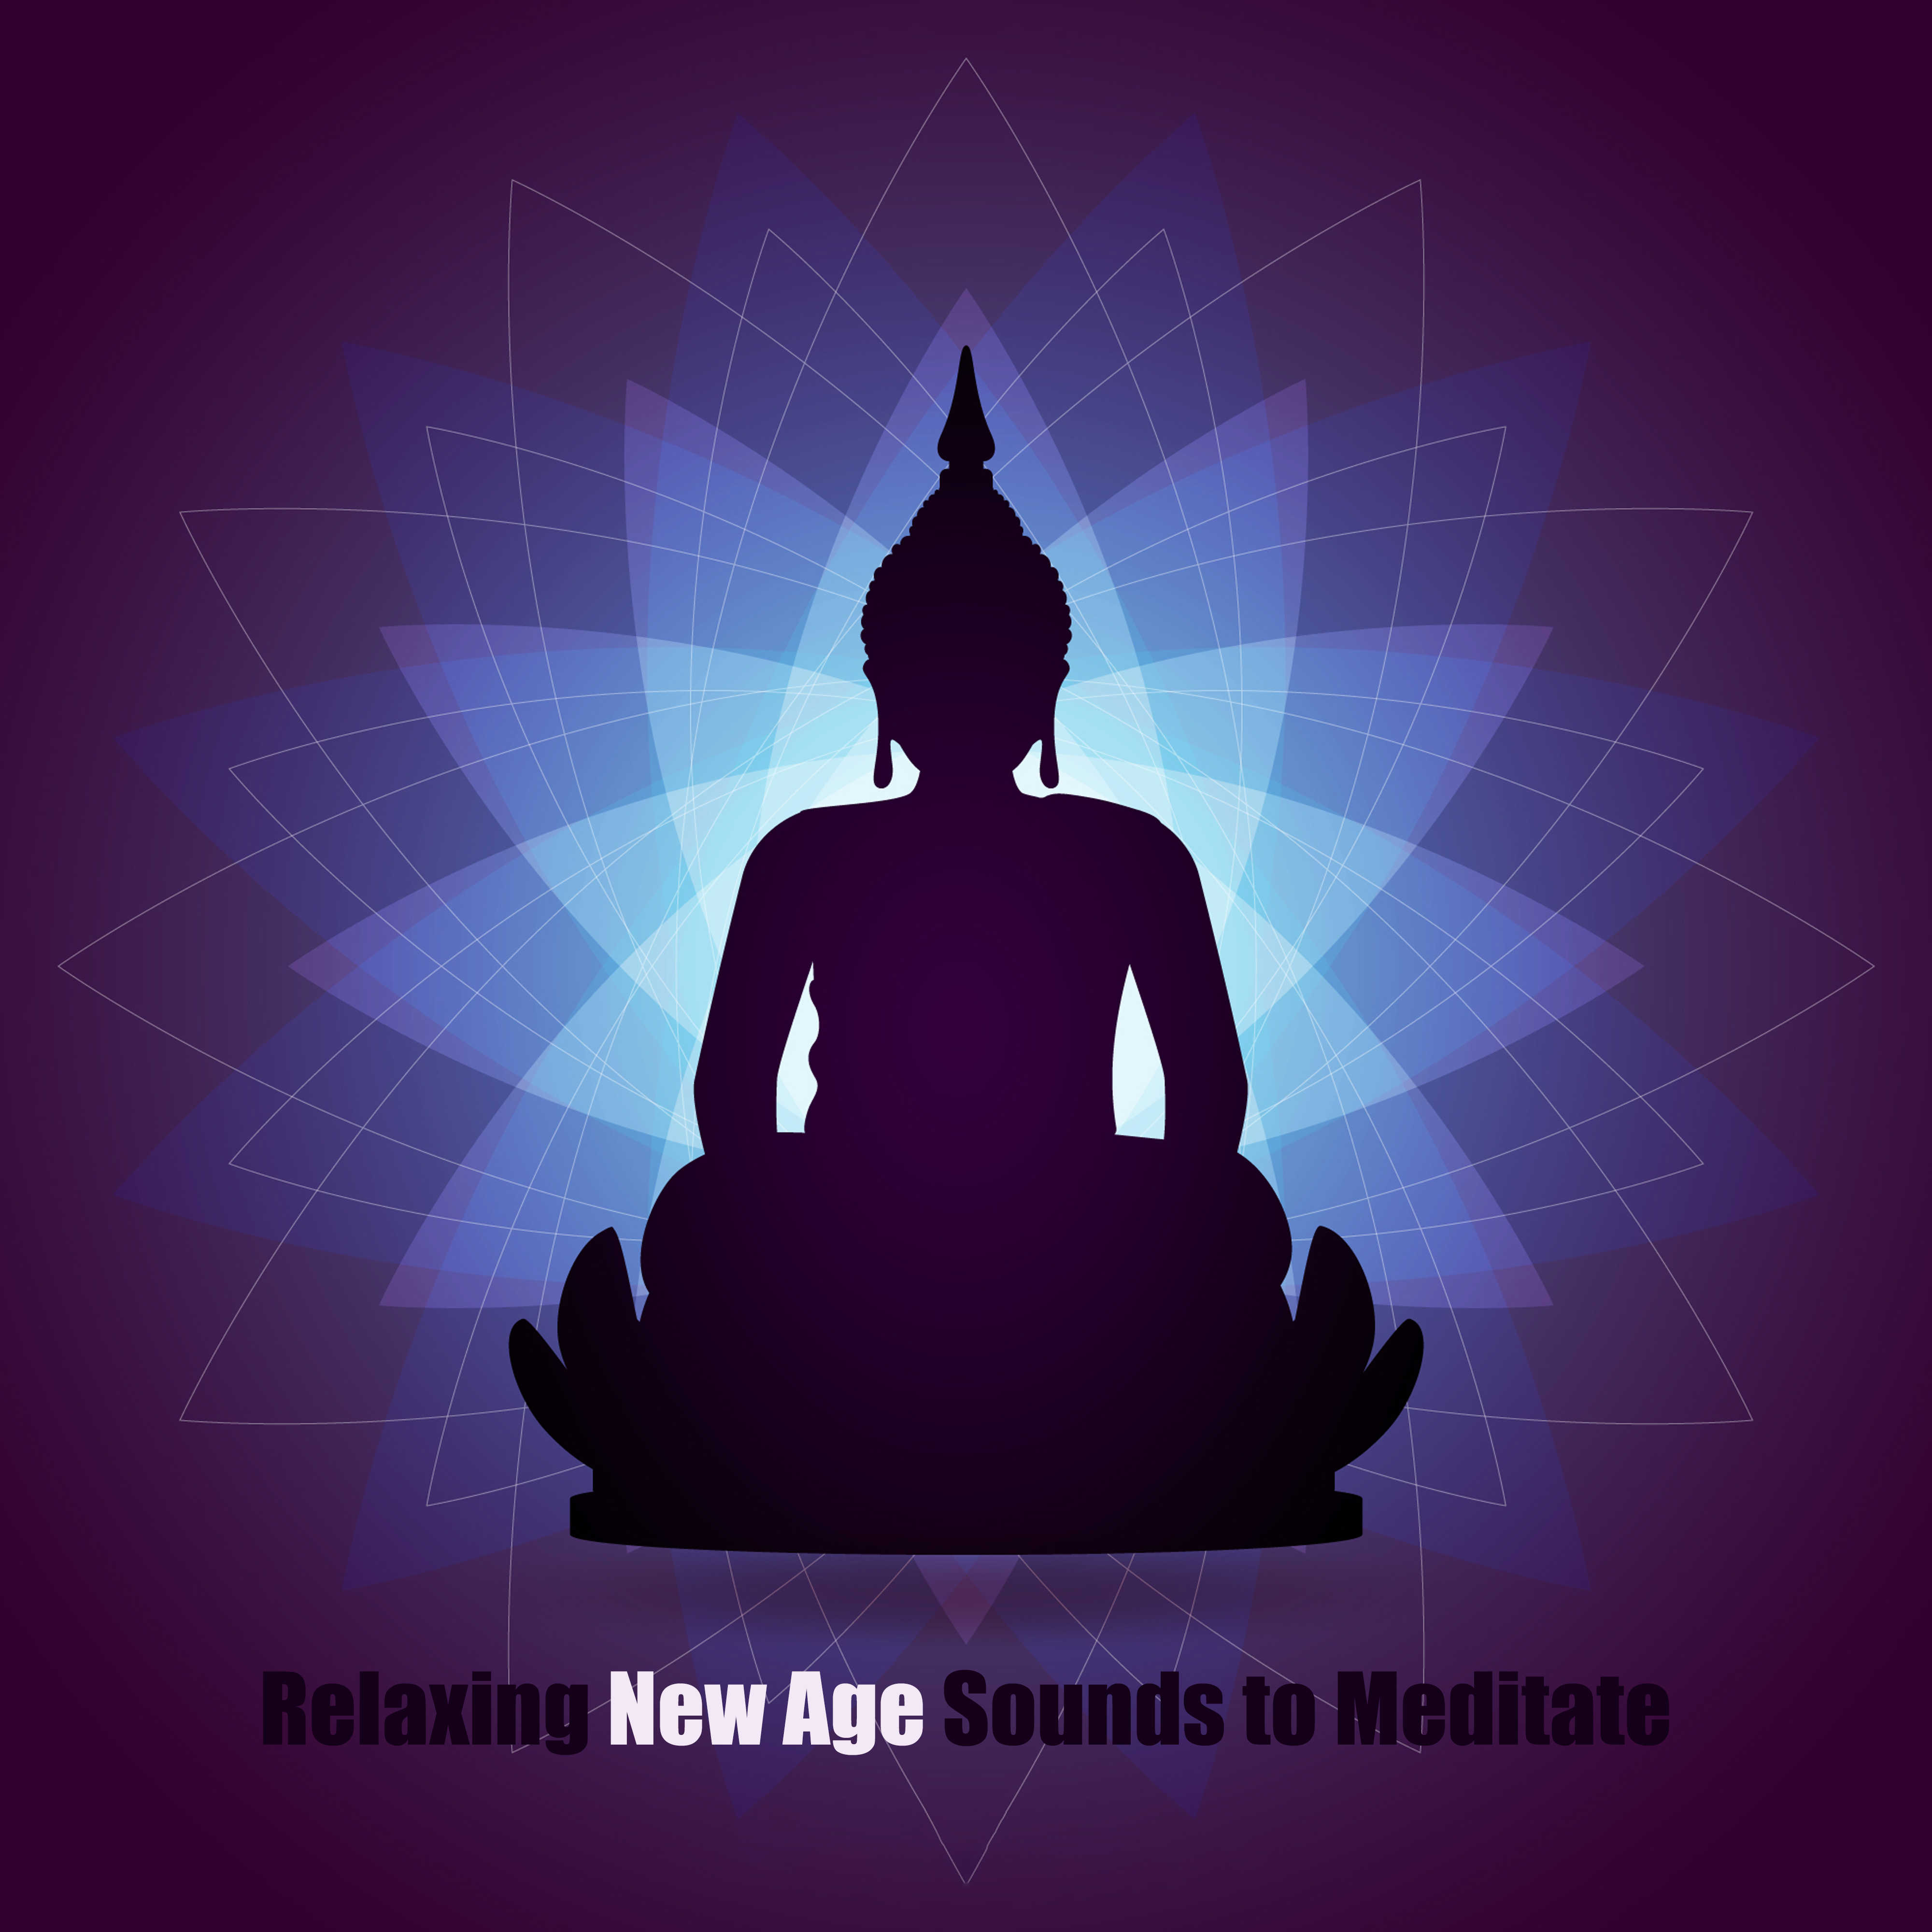 Relaxing New Age Sounds to Meditate